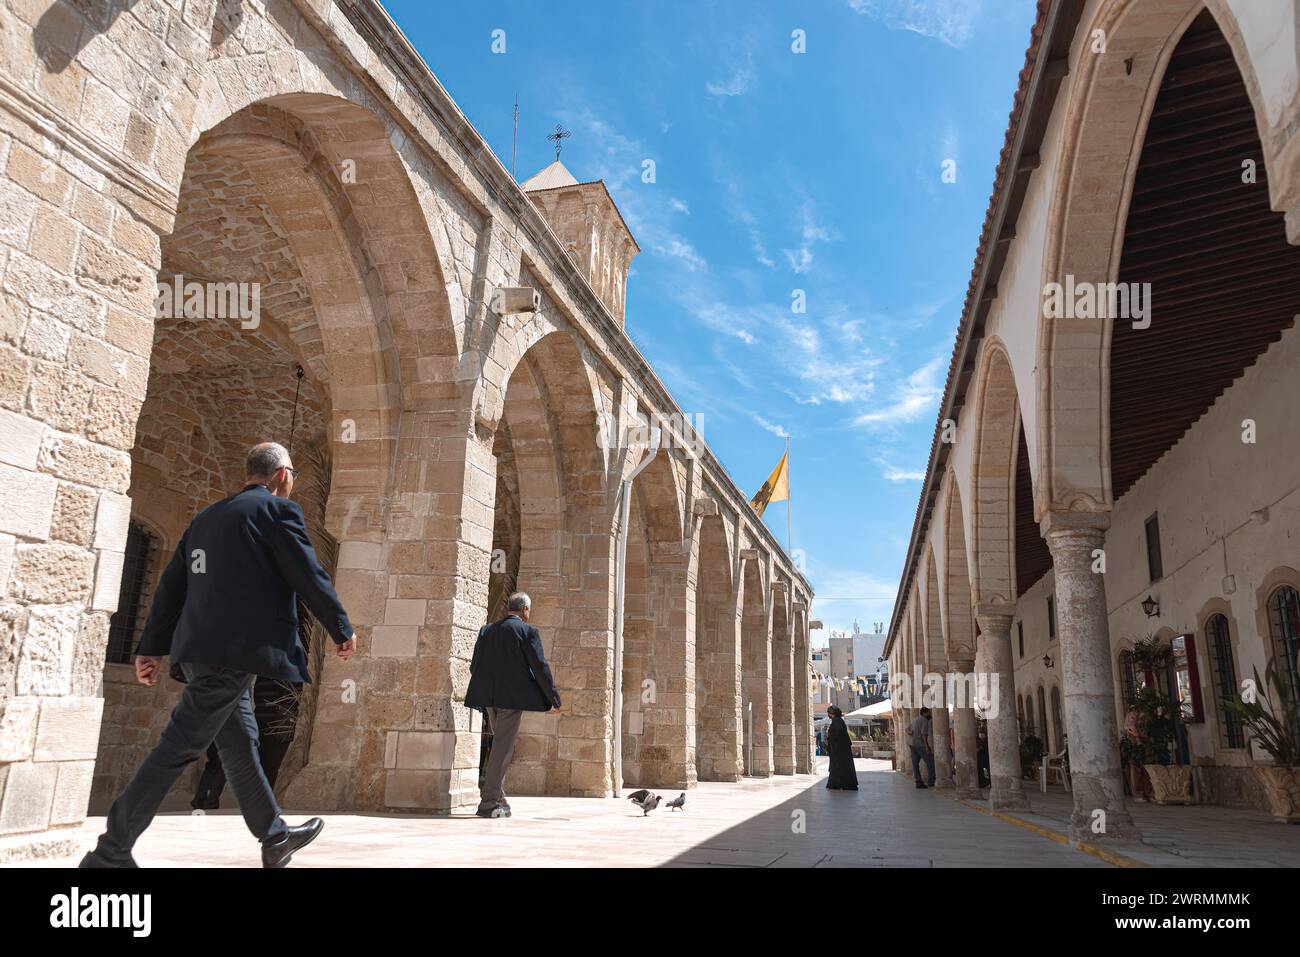 Larnaca, Cyprus - April 21, 2022: People walking in the courtyard of Church of Saint Lazarus Stock Photo